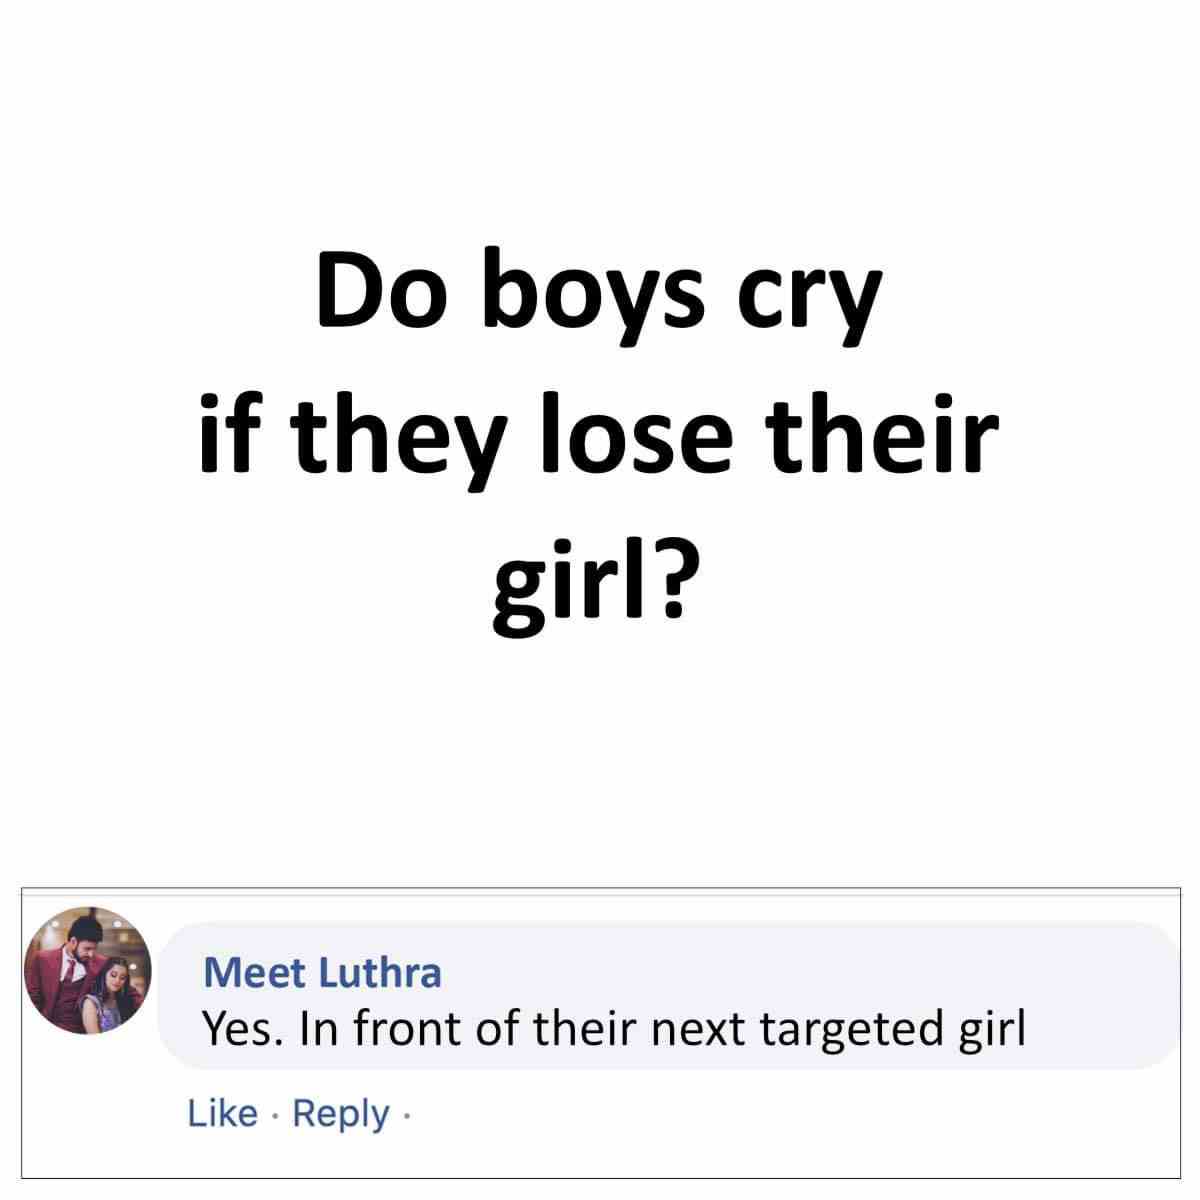 Do boys cry if they lose their girl?